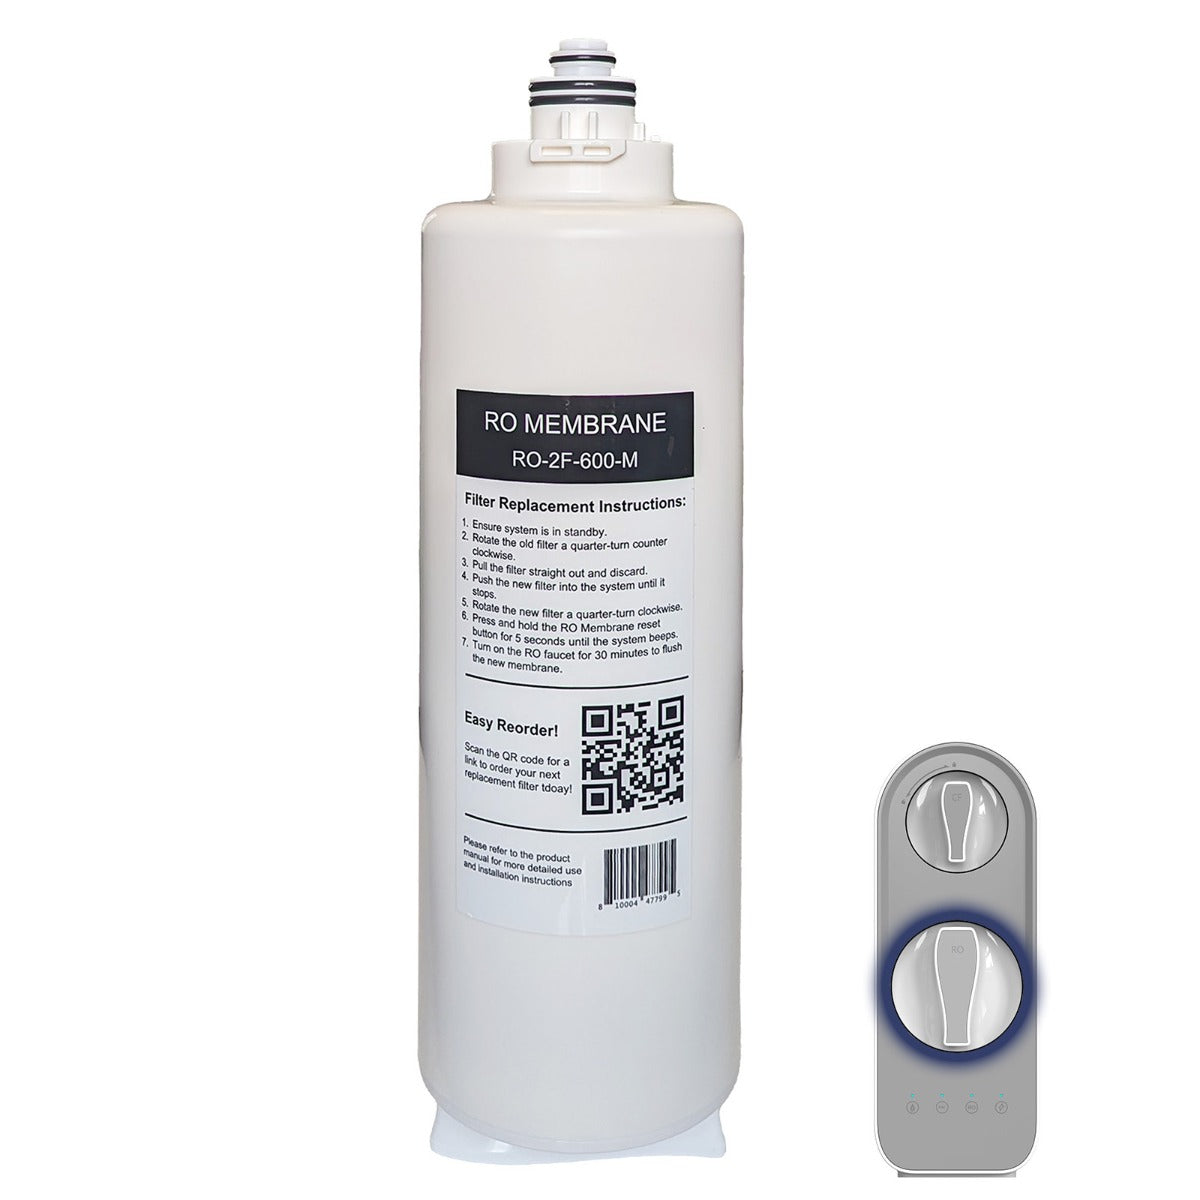 USWF Replacement RO Membrane for RO-2F-600 Tankless Reverse Osmosis System